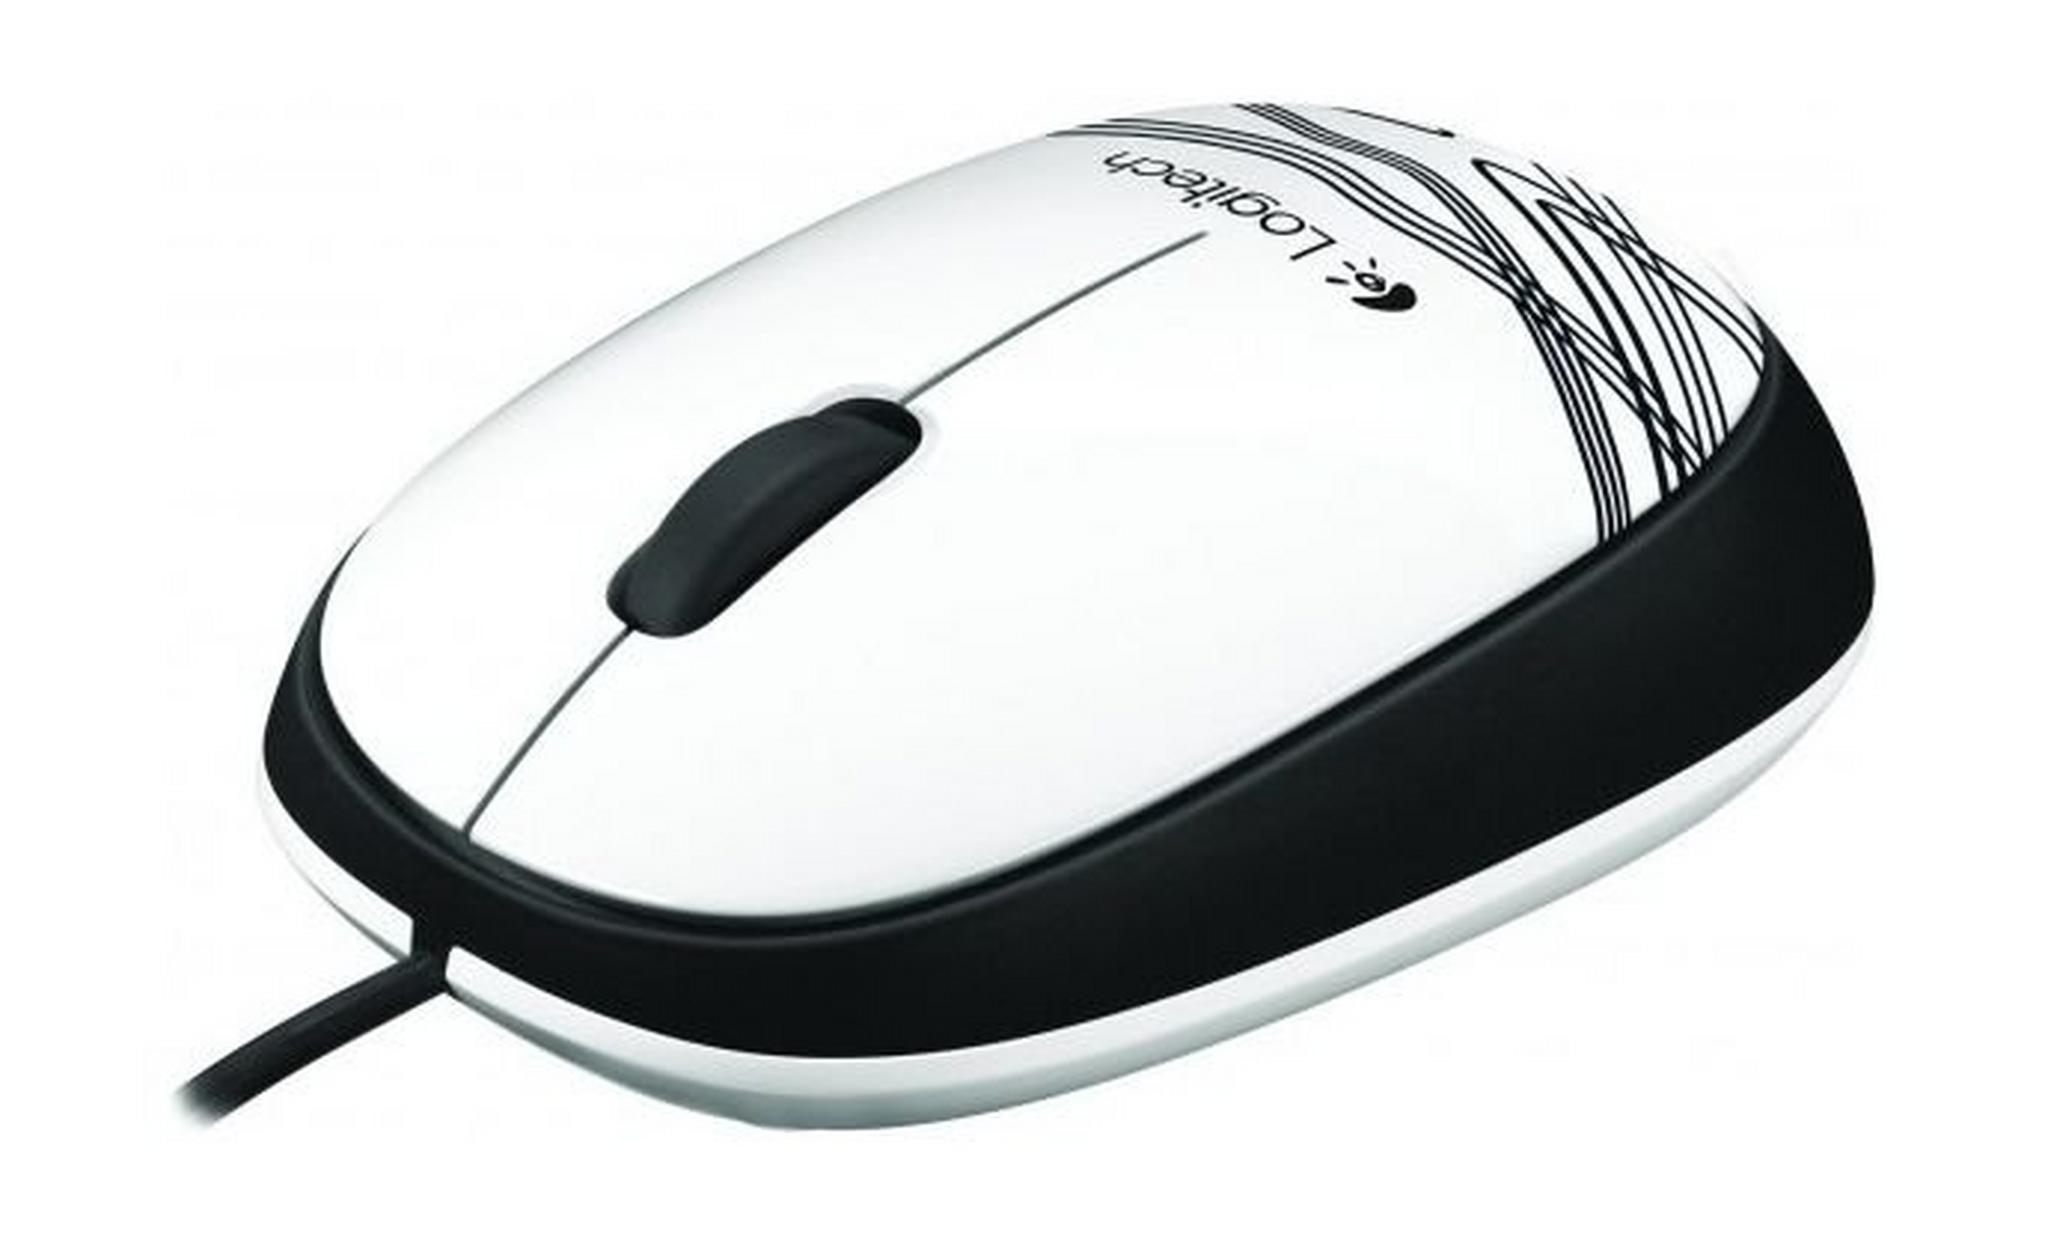 Logitech M105 Wired Optical Mouse - White